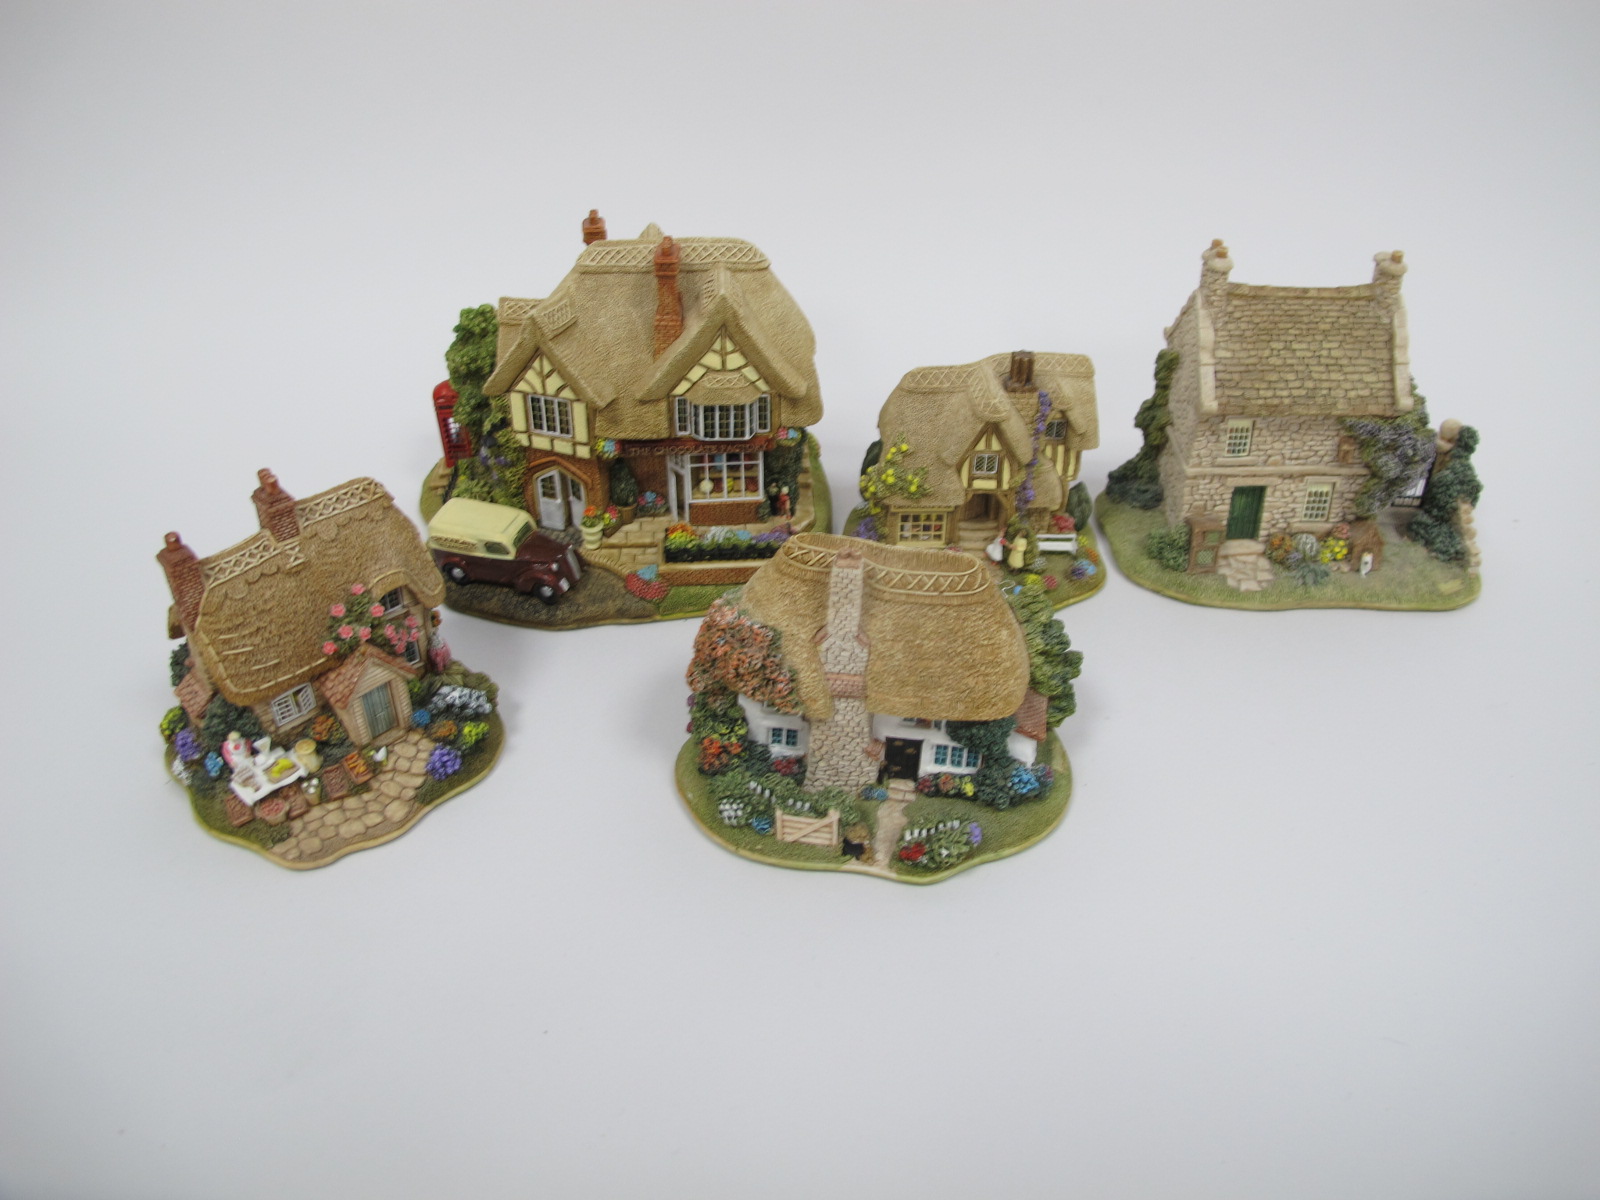 Lilliput Lane Cottages, Rainbows End, Fresh Today, Sore Paws, The Chocolate Factory, The Chocolate